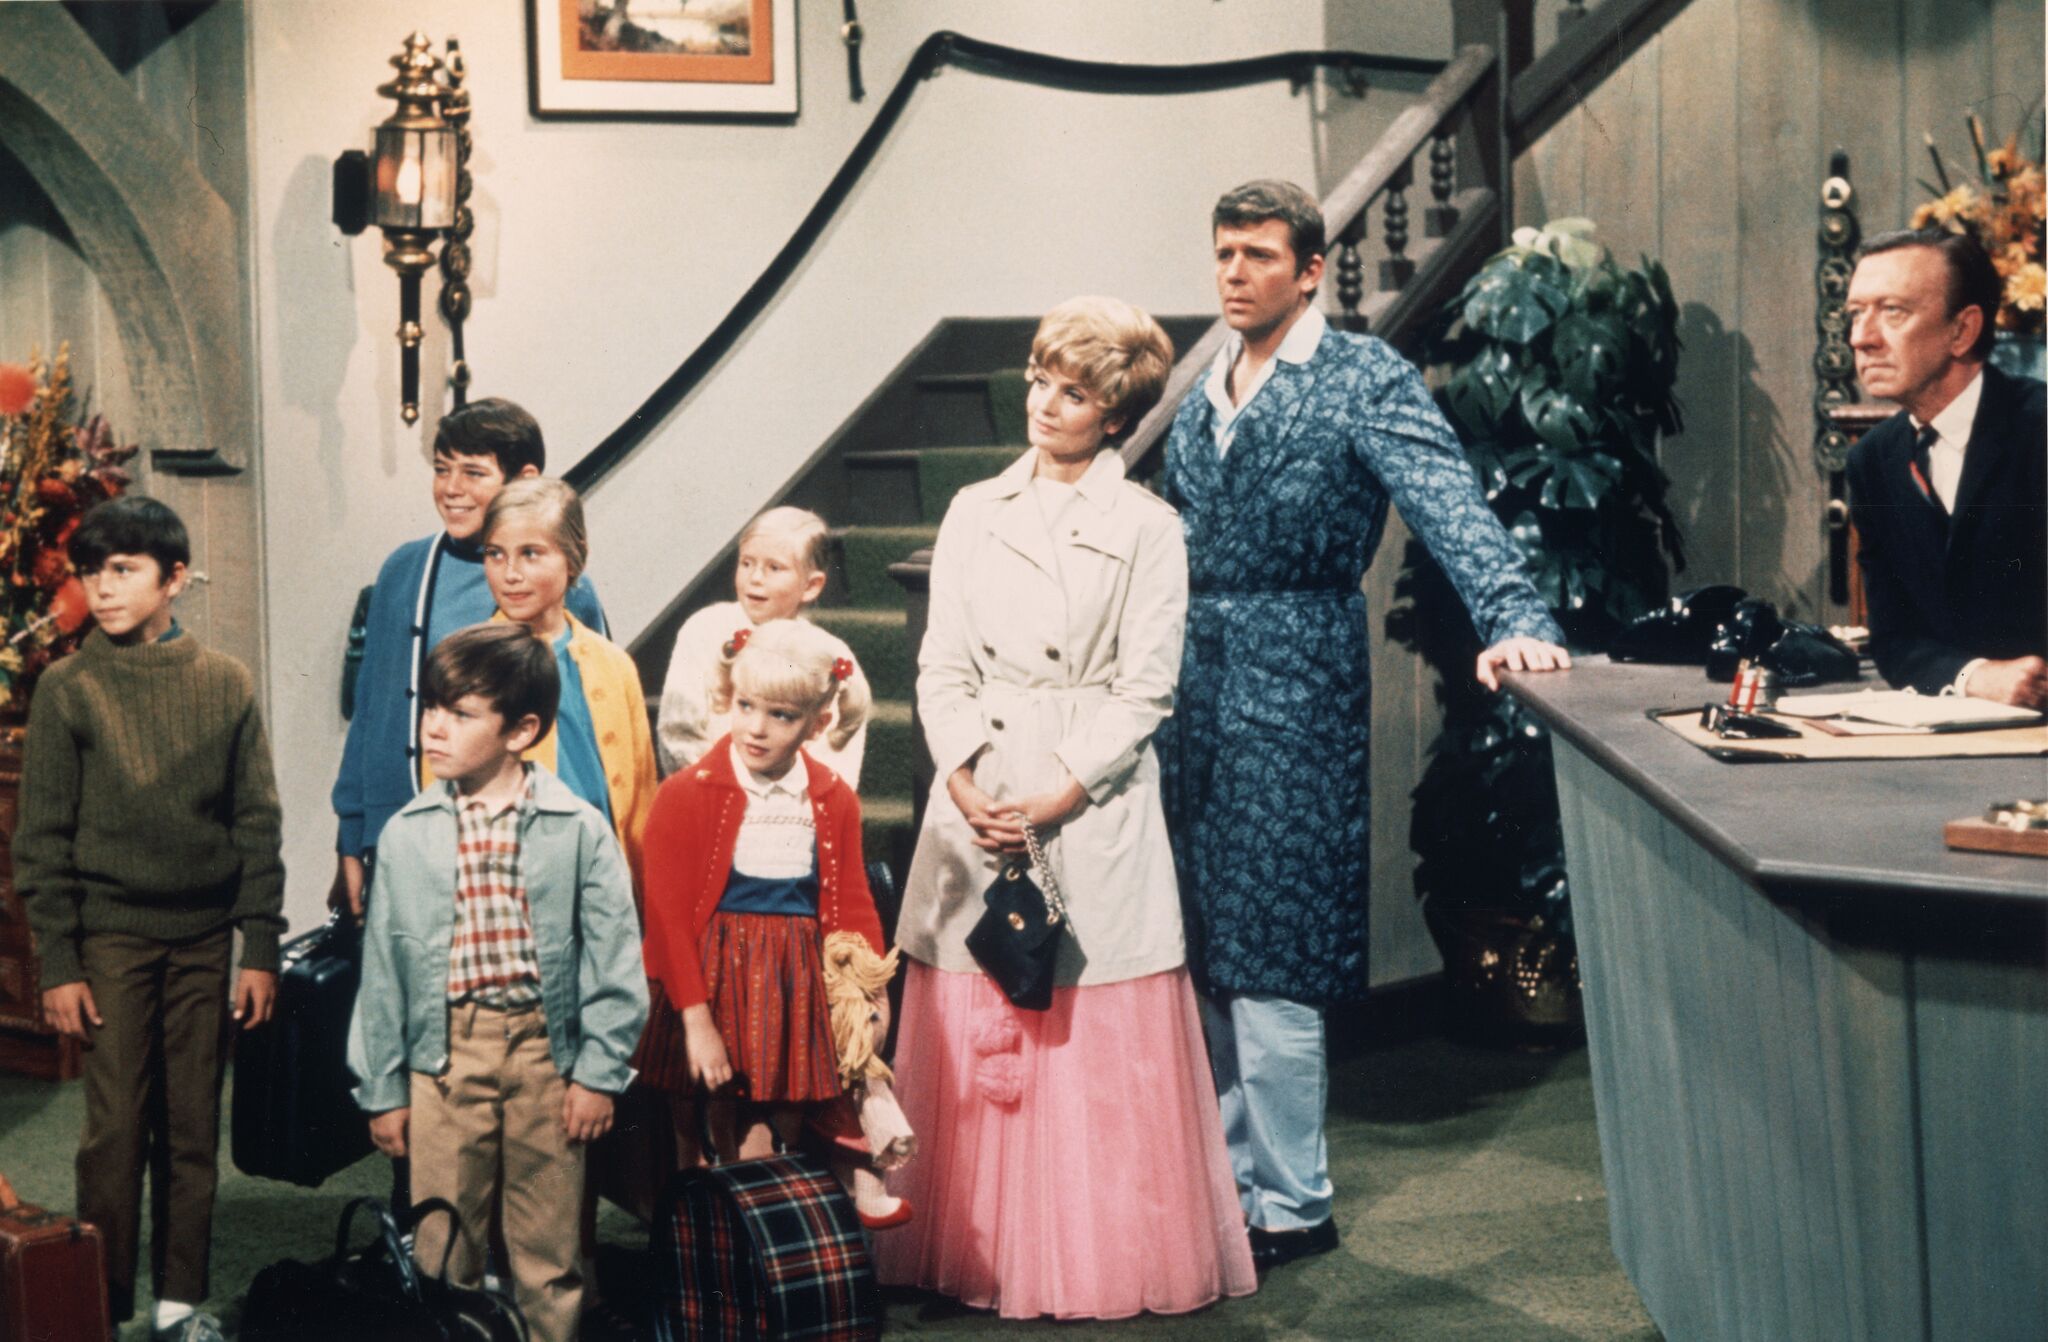 Robert Reed and Florence Henderson stand in a hotel lobby with their television family in a still from the TV series "The Brady Bunch" | Getty Images 